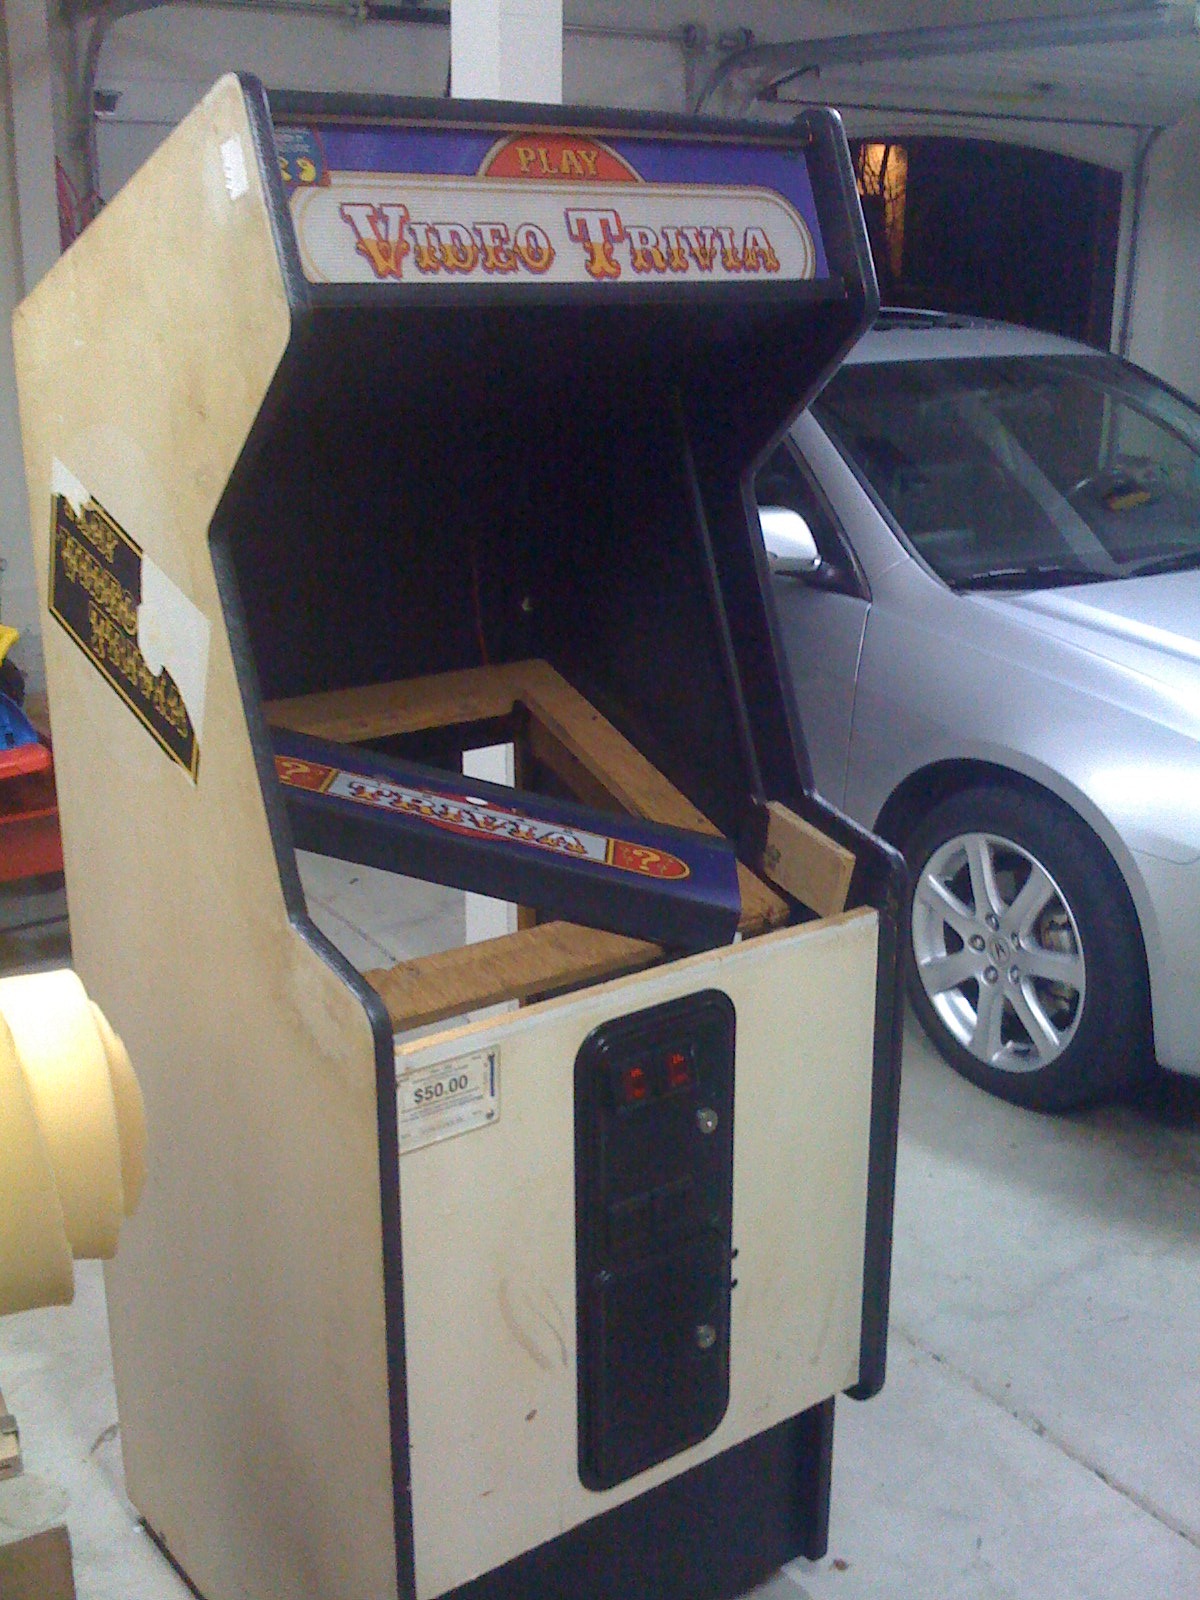 Building Your Own Arcade Cabinet For Geeks Part 1 The Cabinet